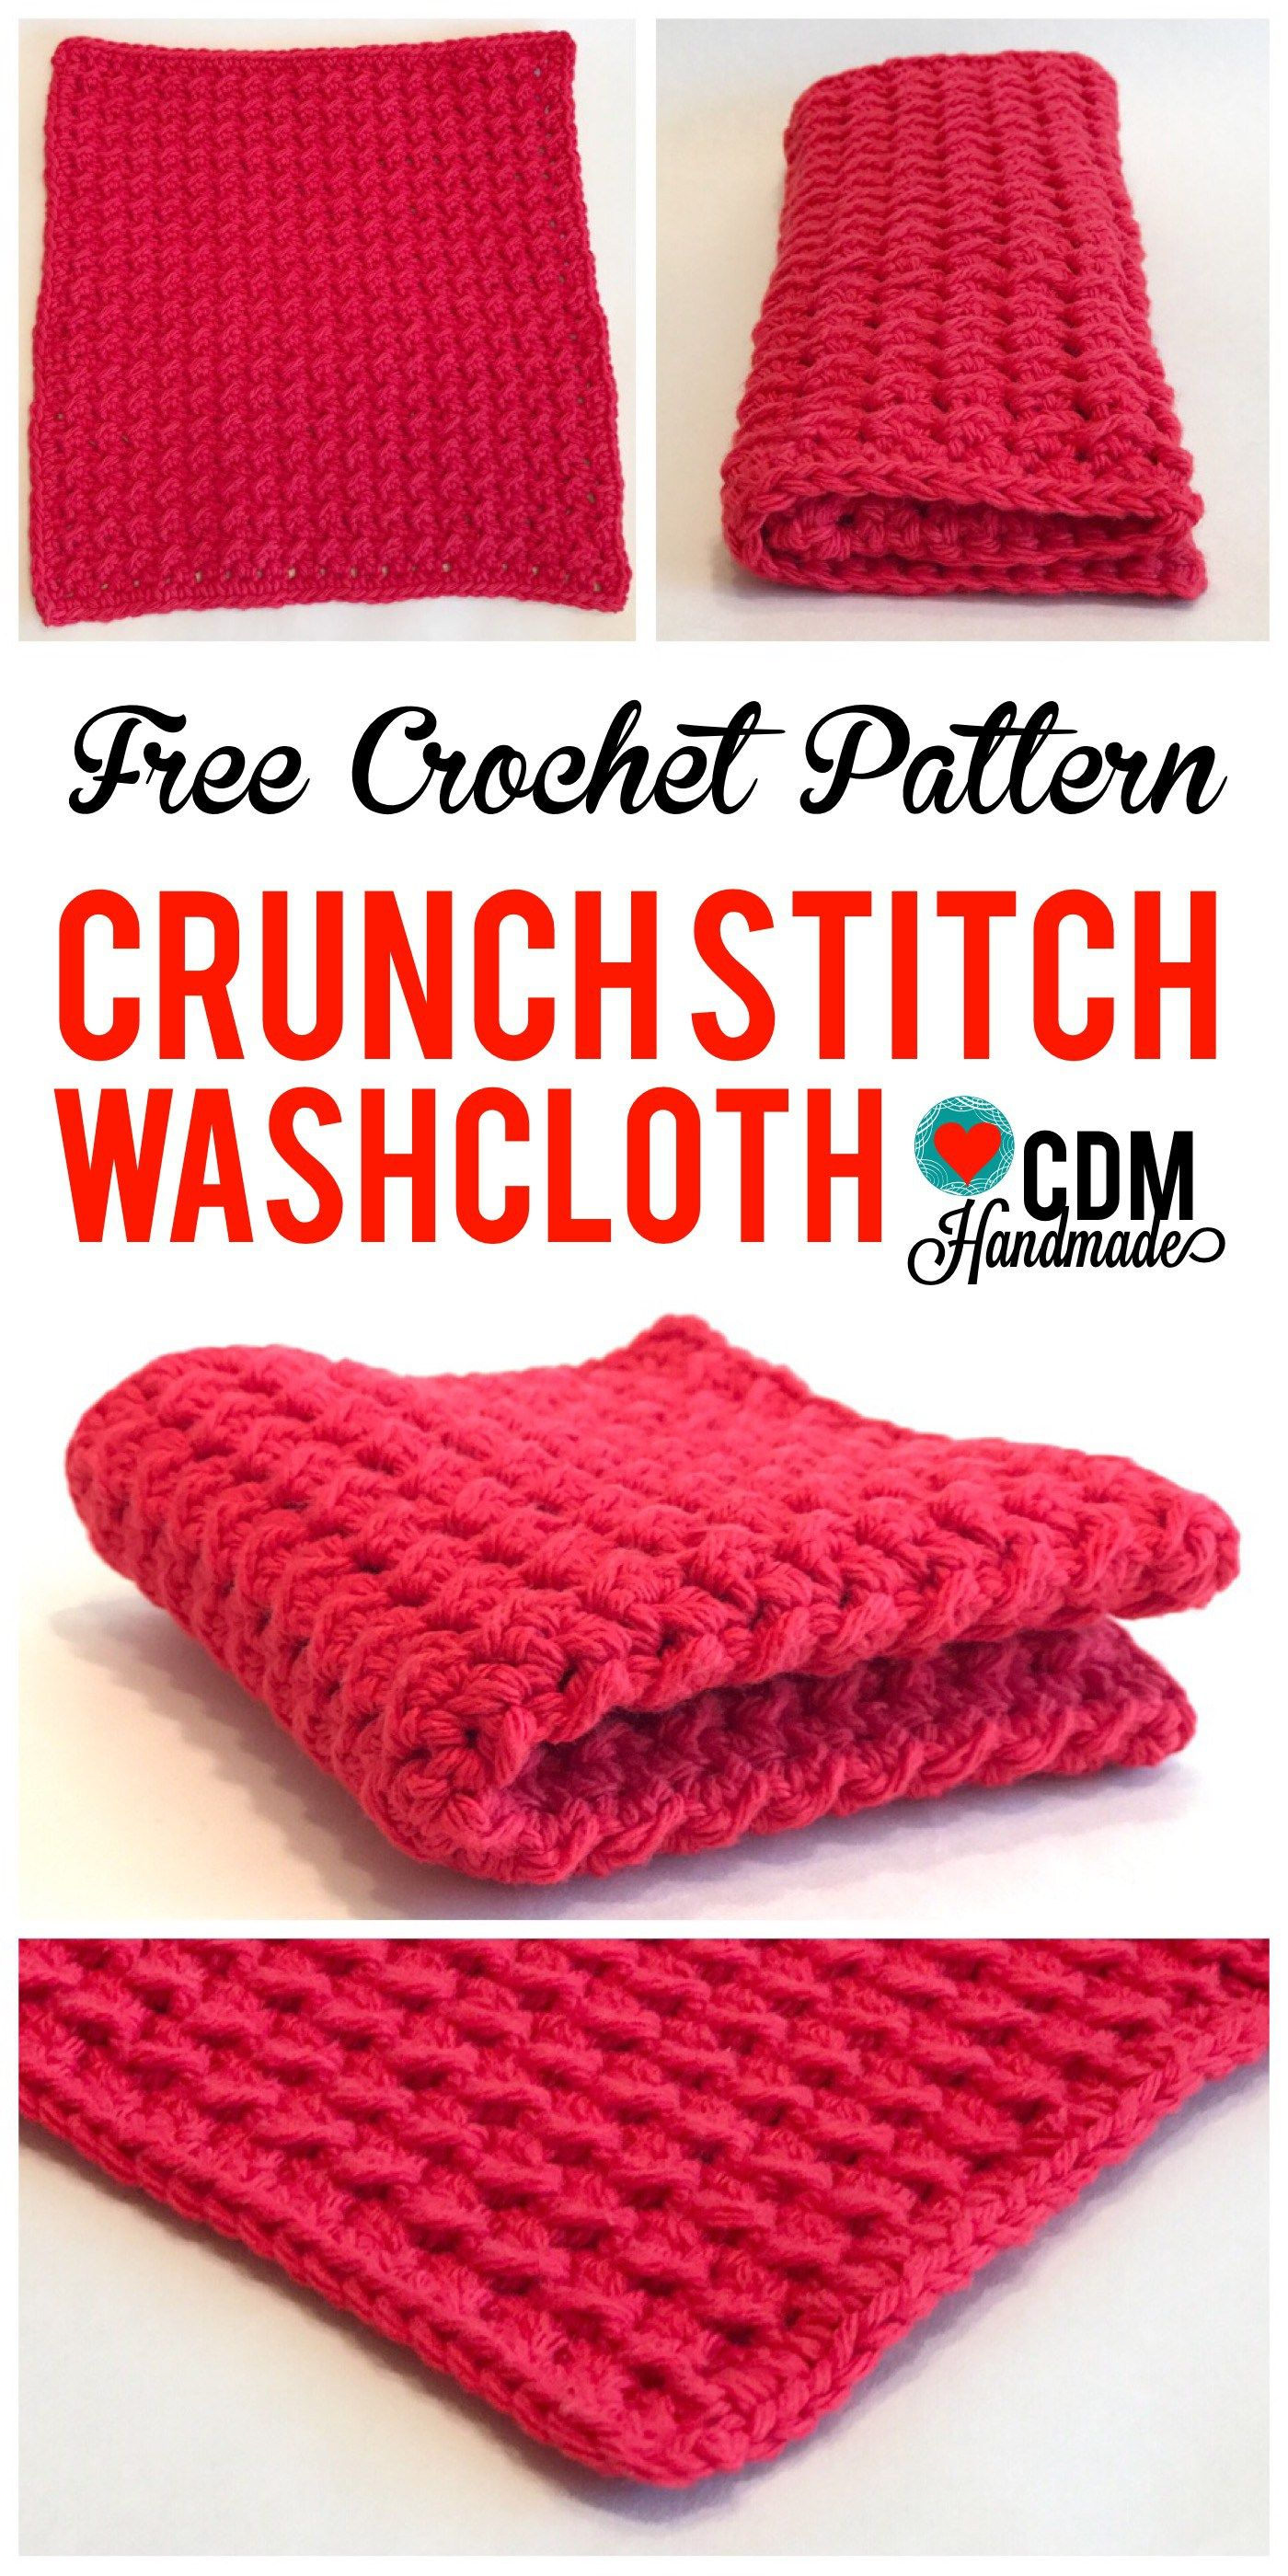 Crochet Washcloth Pattern Free Check Out This Quick And Easy Free Crochet Washcloth Pattern For My